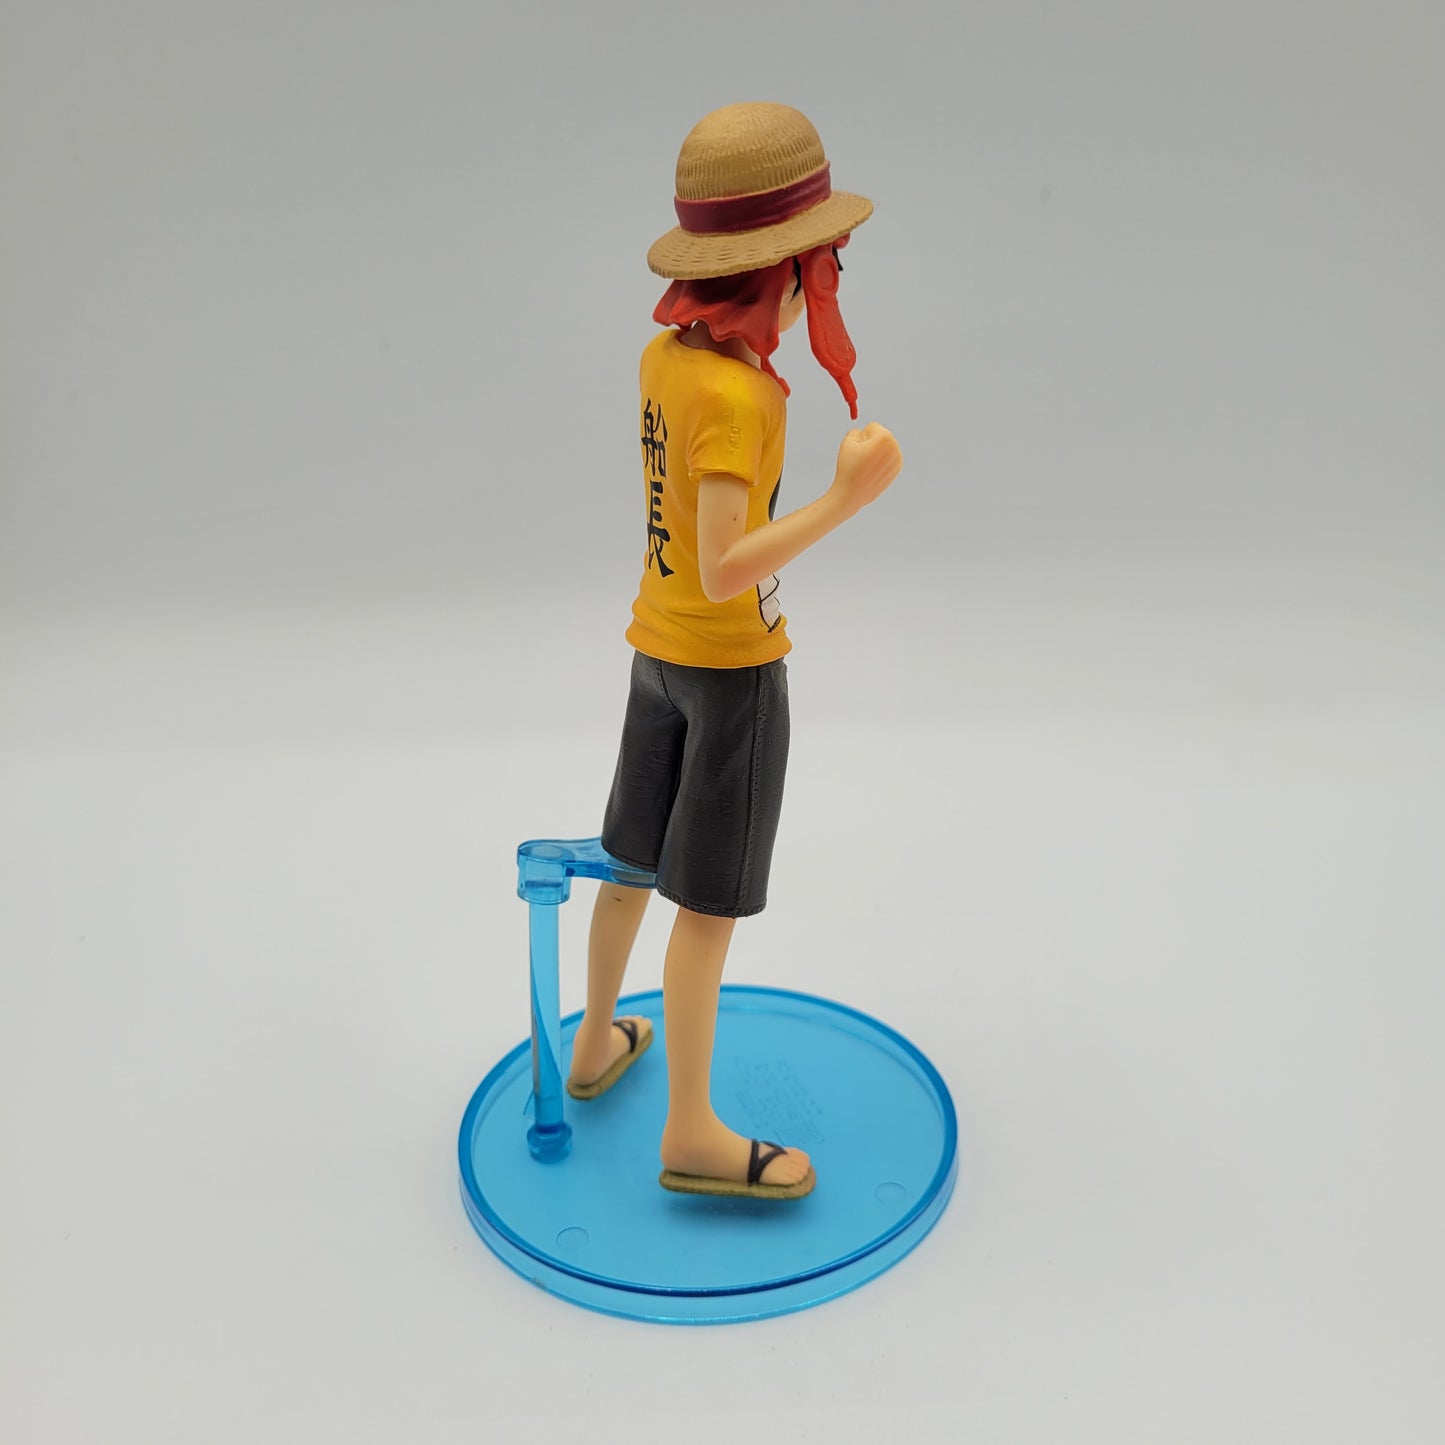 Occasion One Piece Monkey D. Luffy